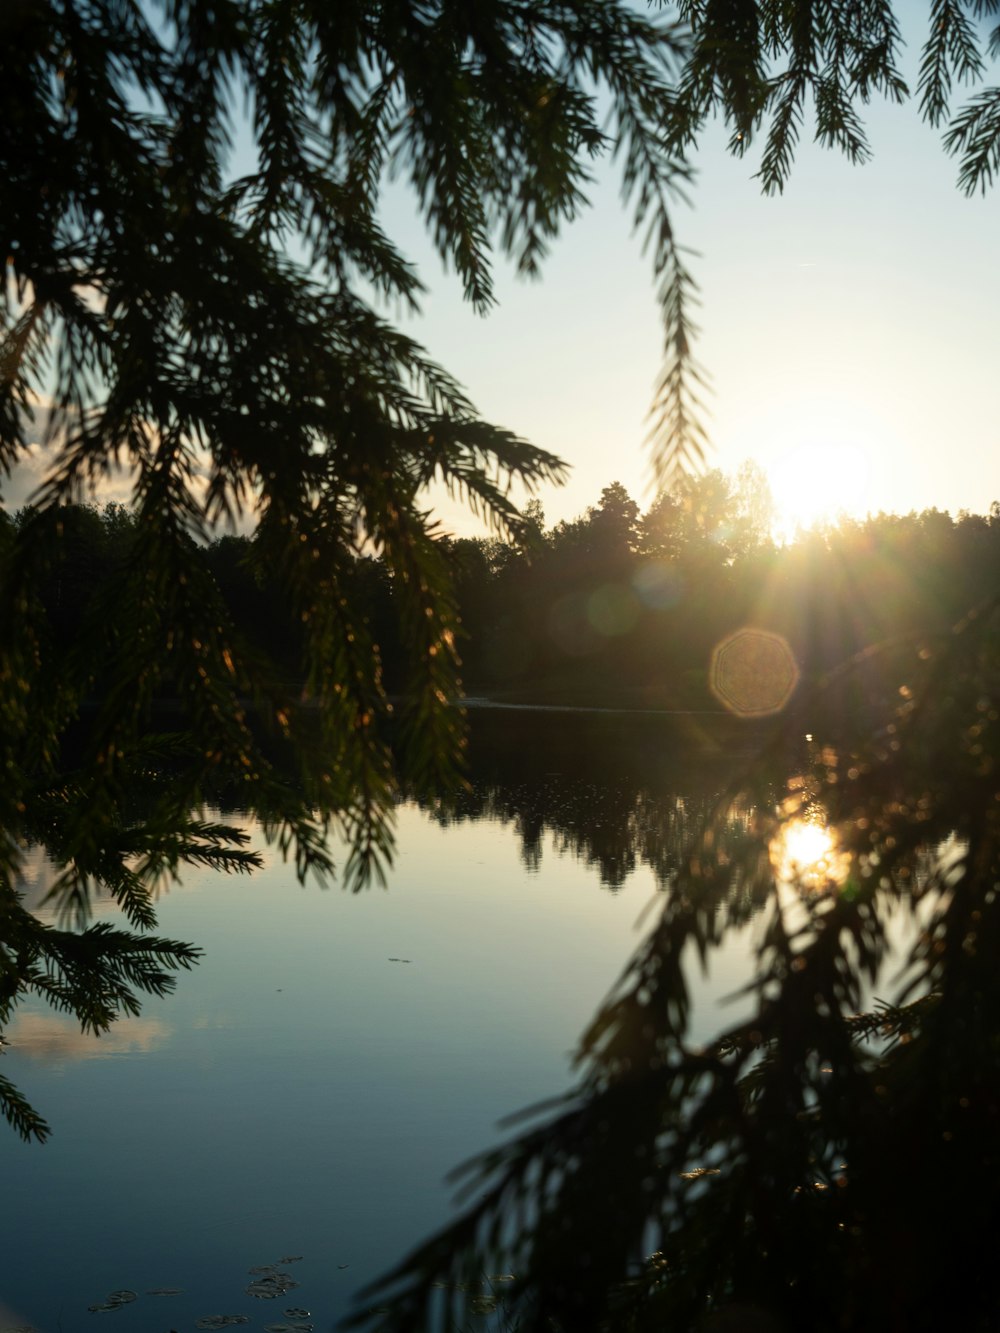 the sun is setting over a lake with trees in the foreground